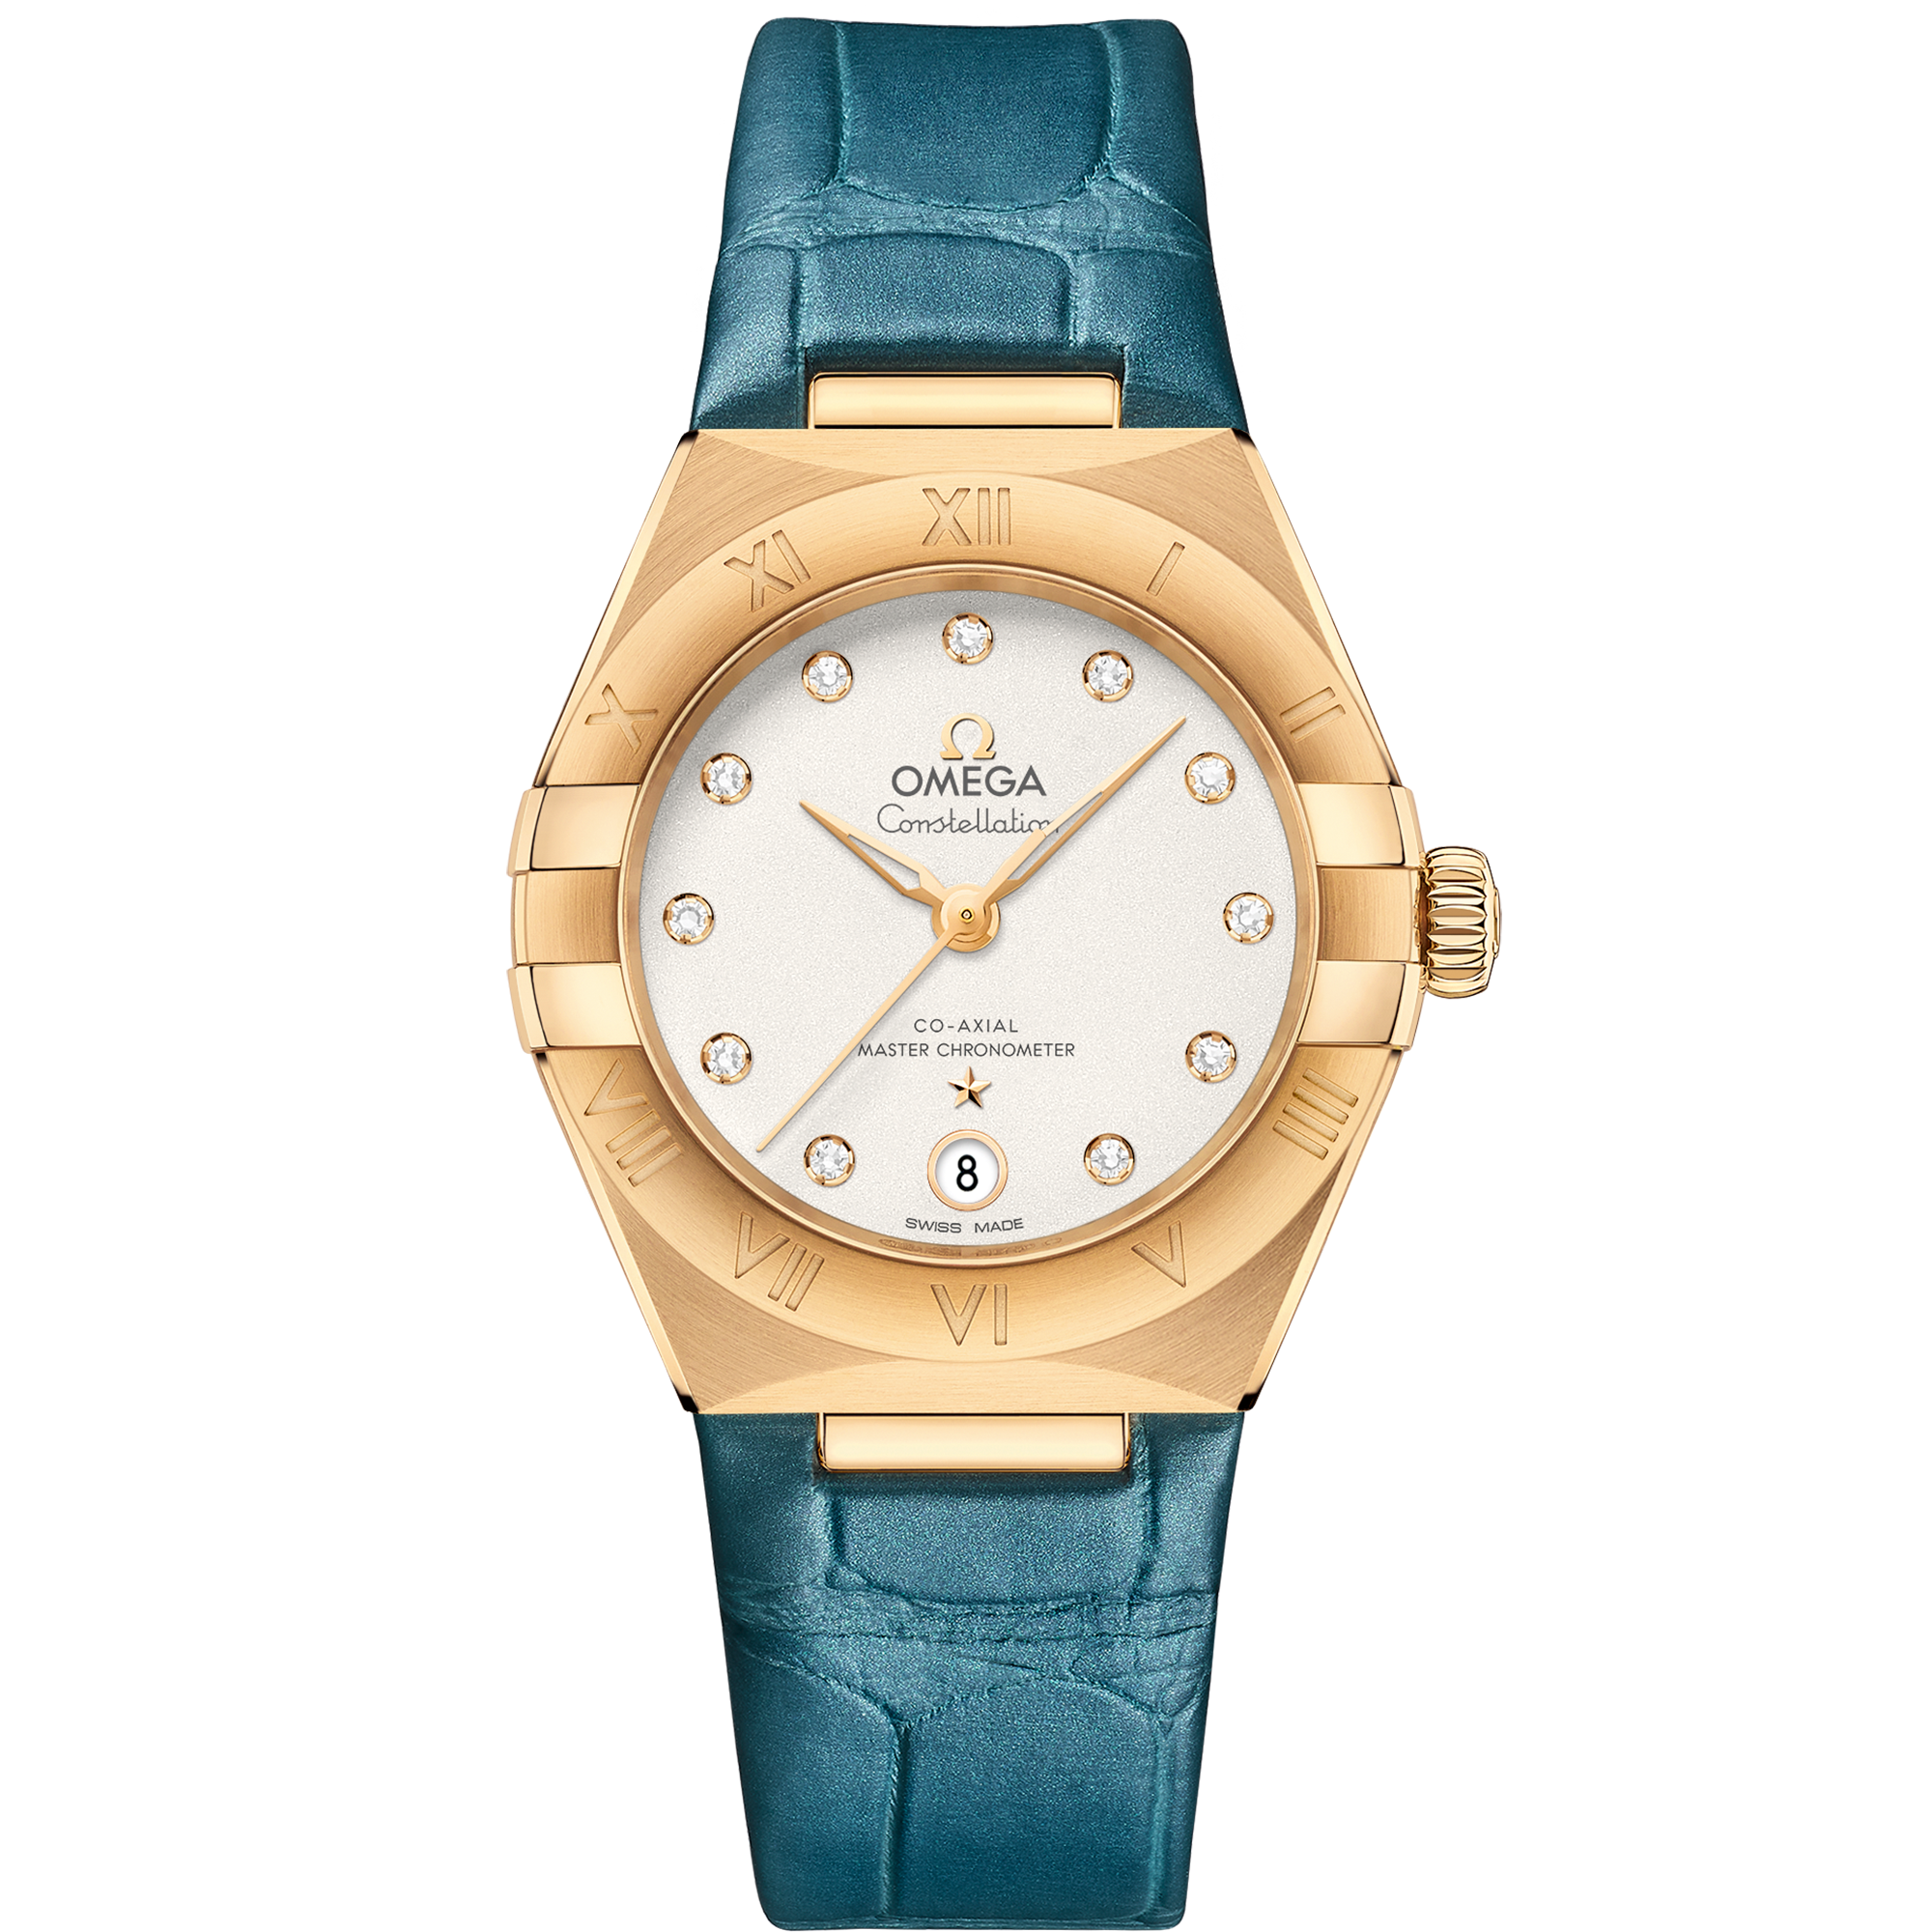 Constellation 29 mm, yellow gold on leather strap - 131.53.29.20.52.001